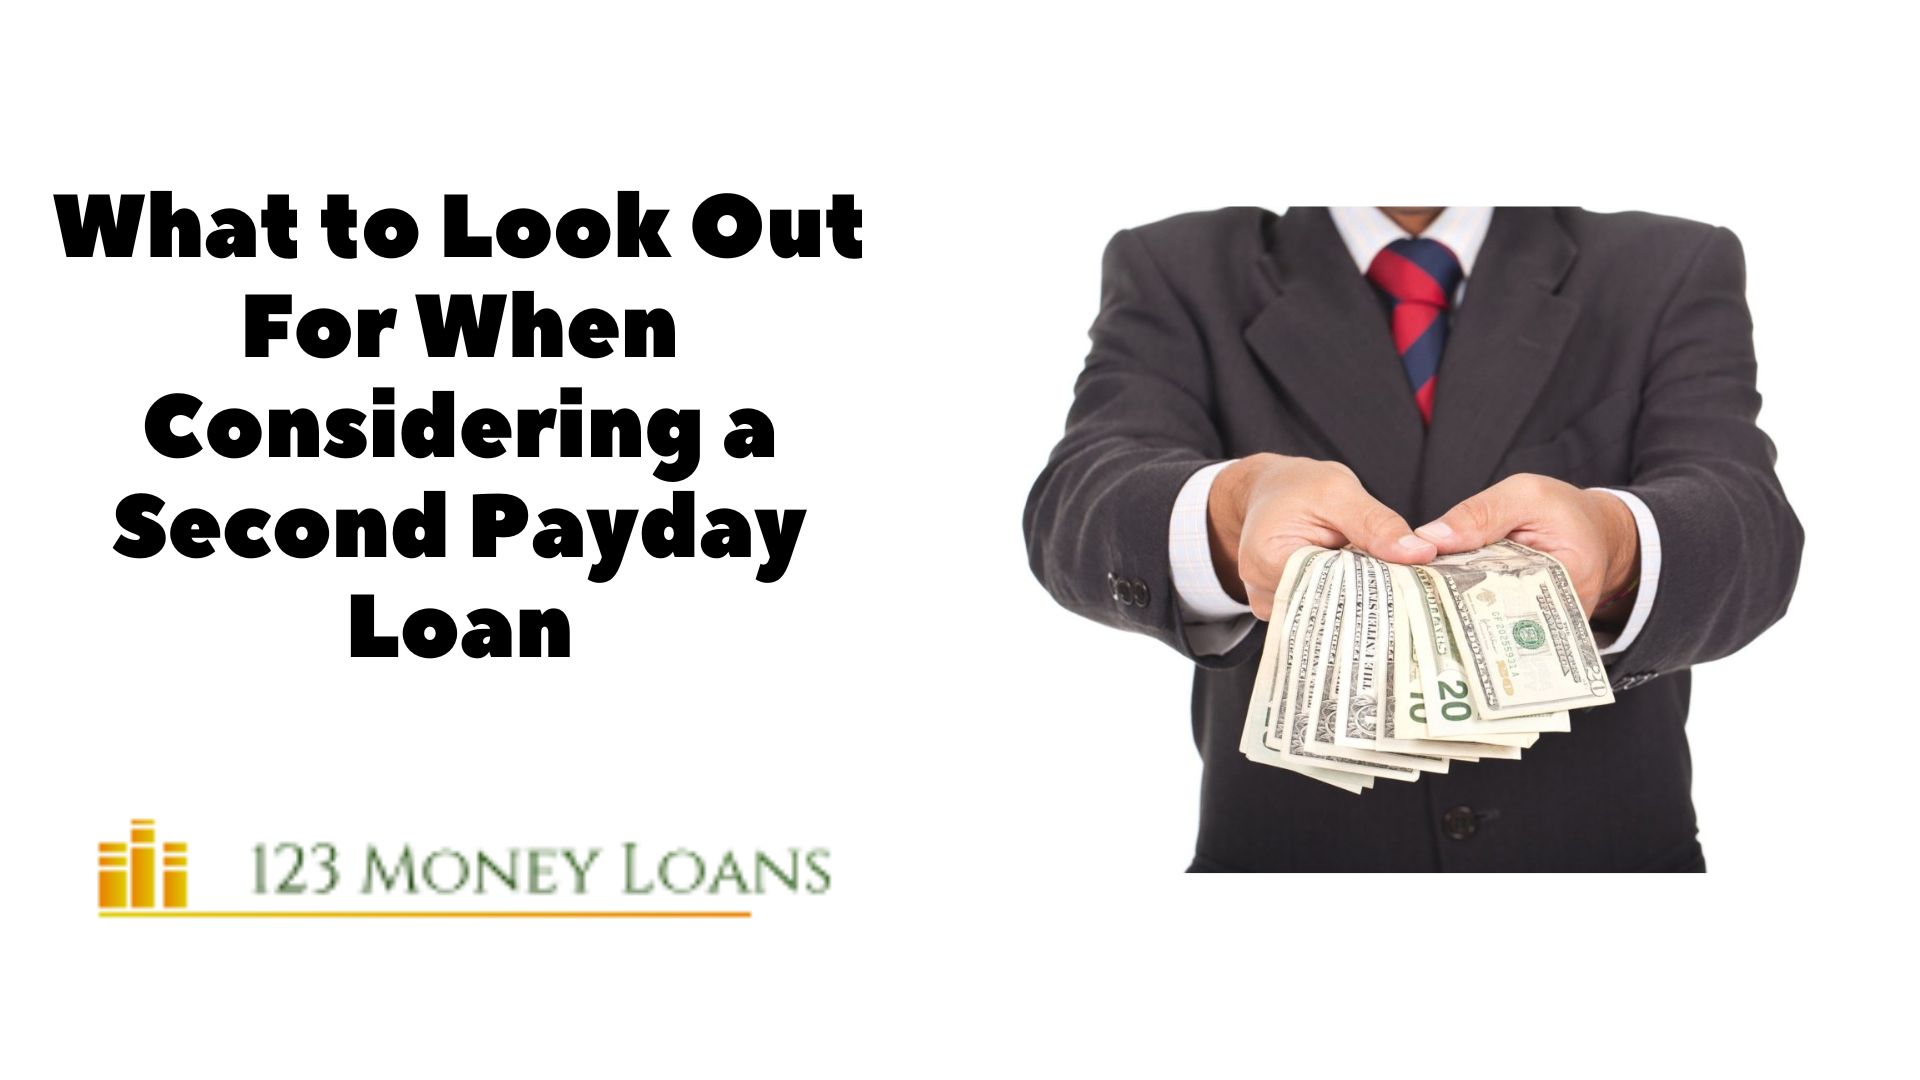 What to Look Out For When Considering a Second Payday Loan